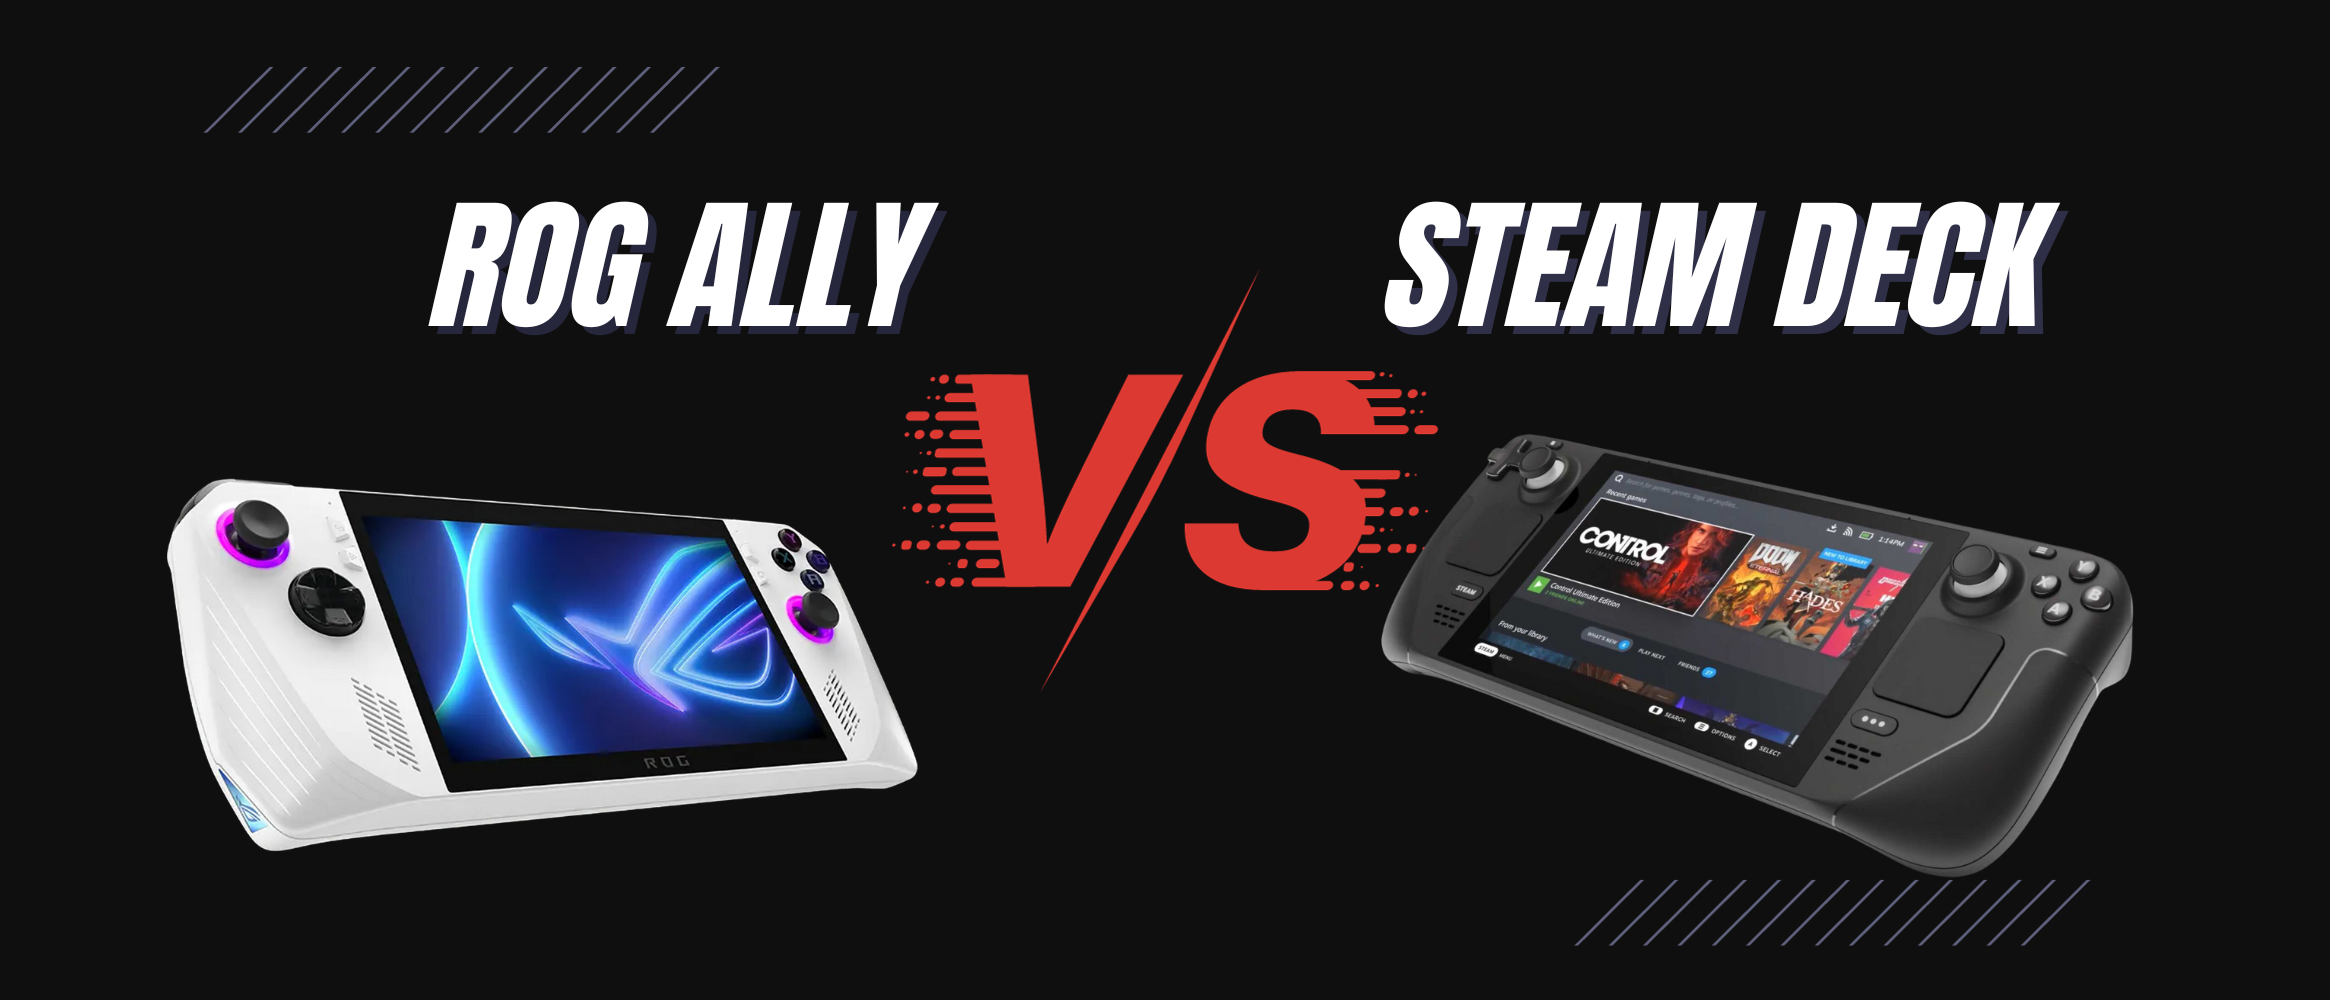 Steam Deck vs ASUS ROG Ally - specs, price, & more